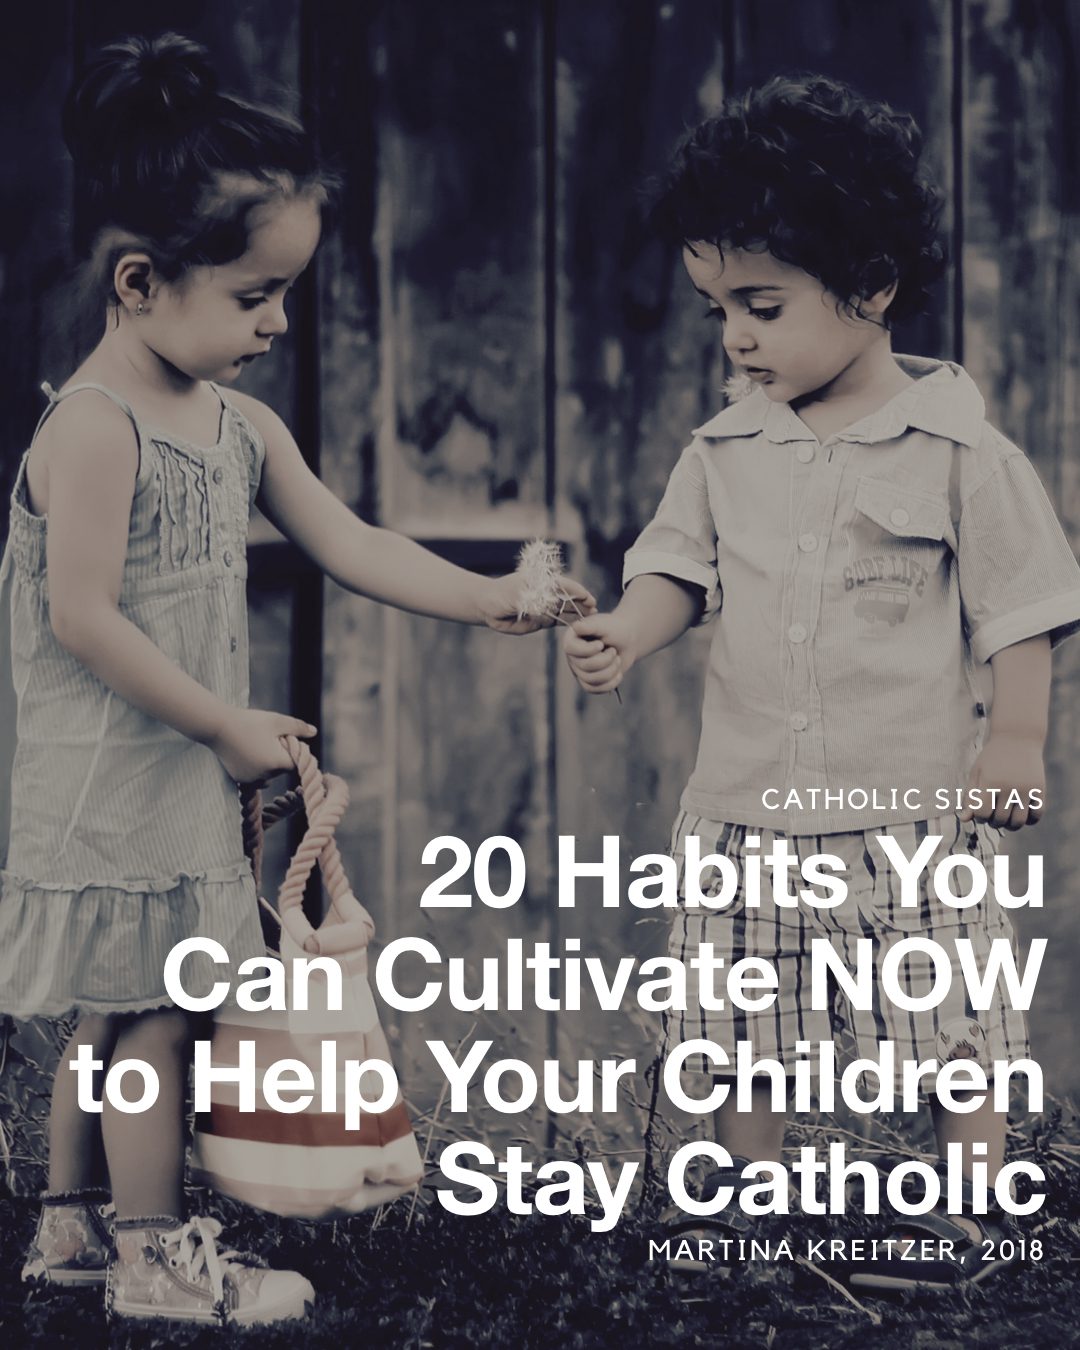 20 Habits You Can Cultivate NOW to Help Your Children Stay Catholic